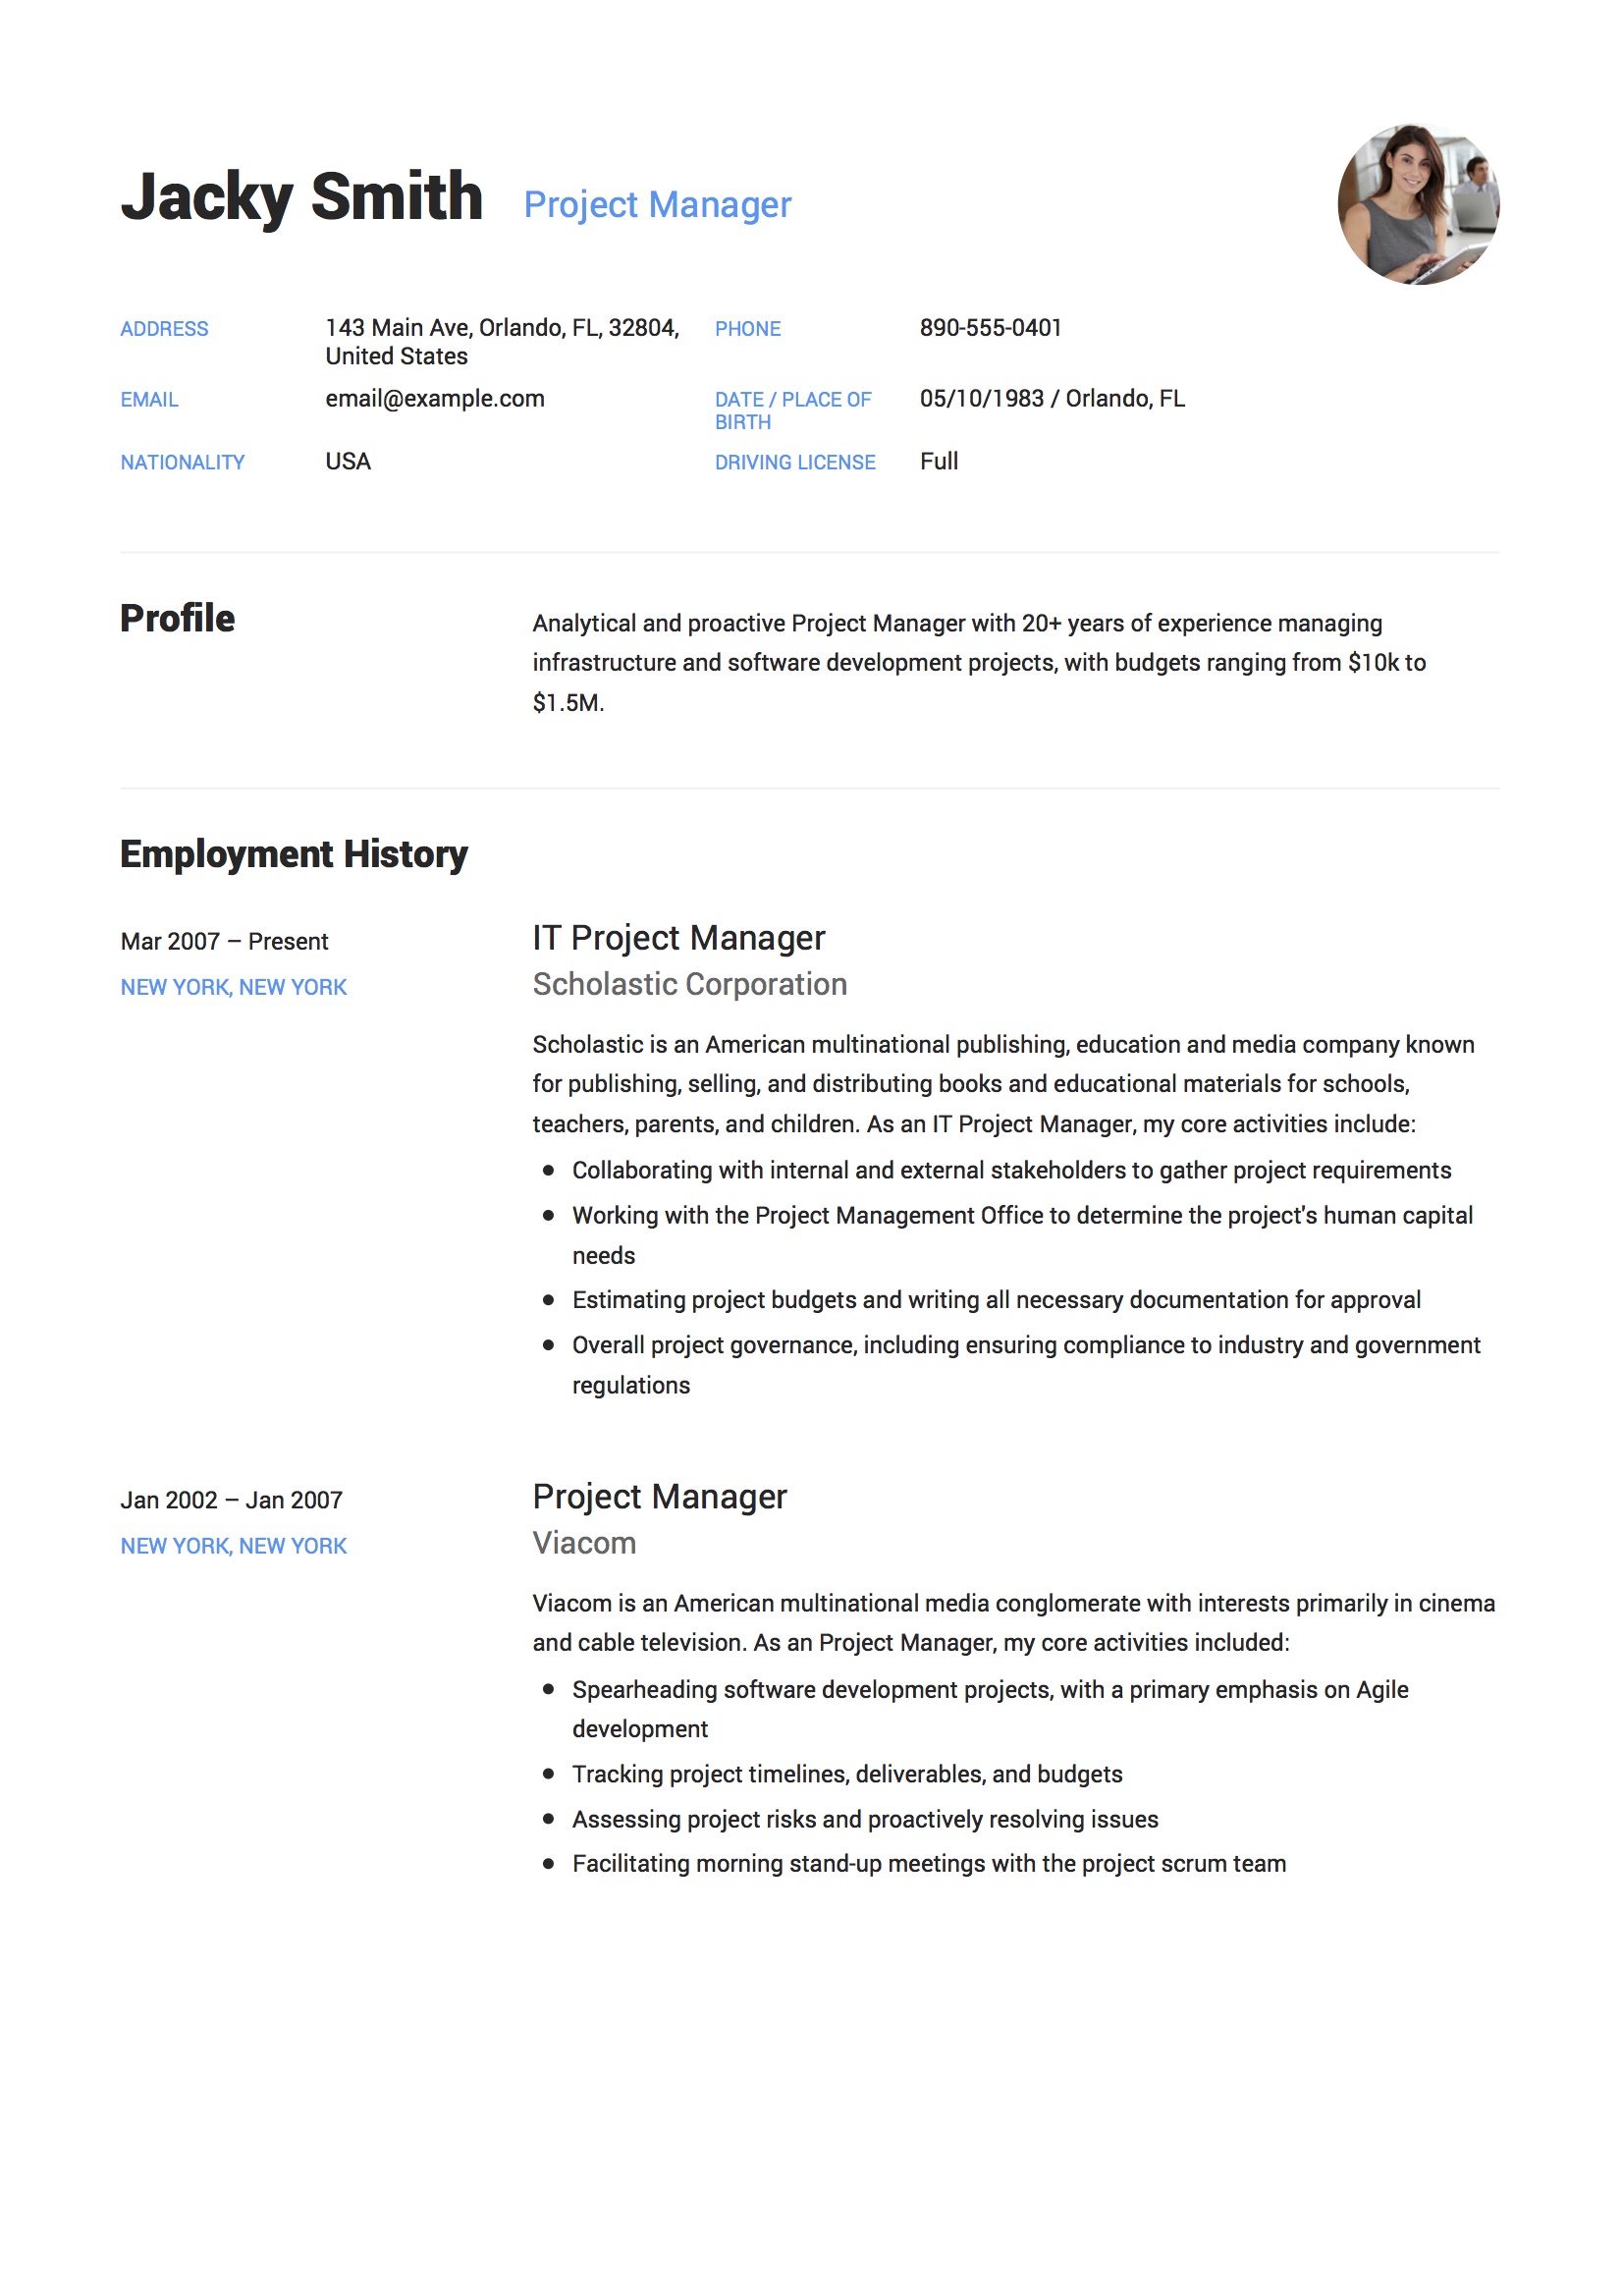 Resume Project Manager 1